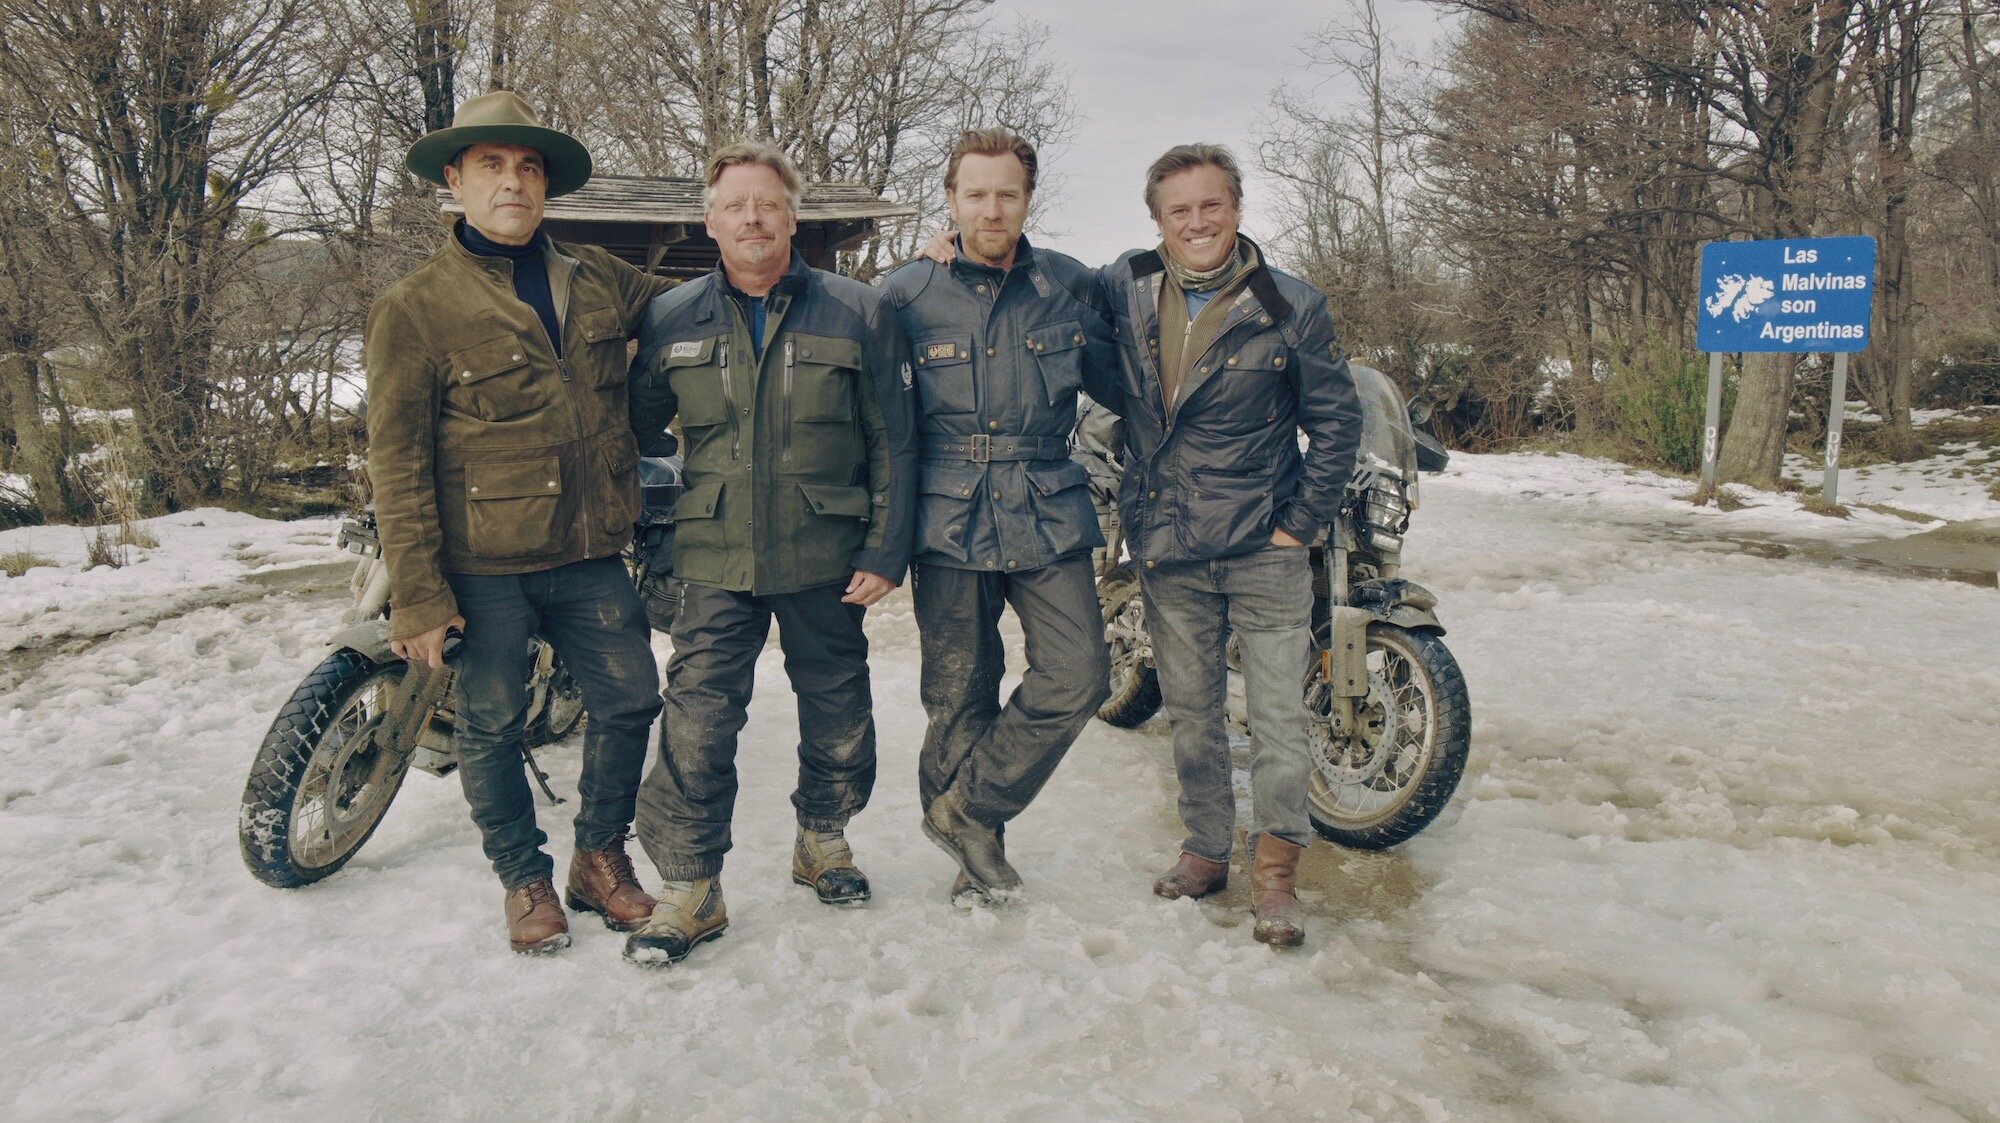 Ewan McGregor and Charley Boorman co-design Clothing Line with